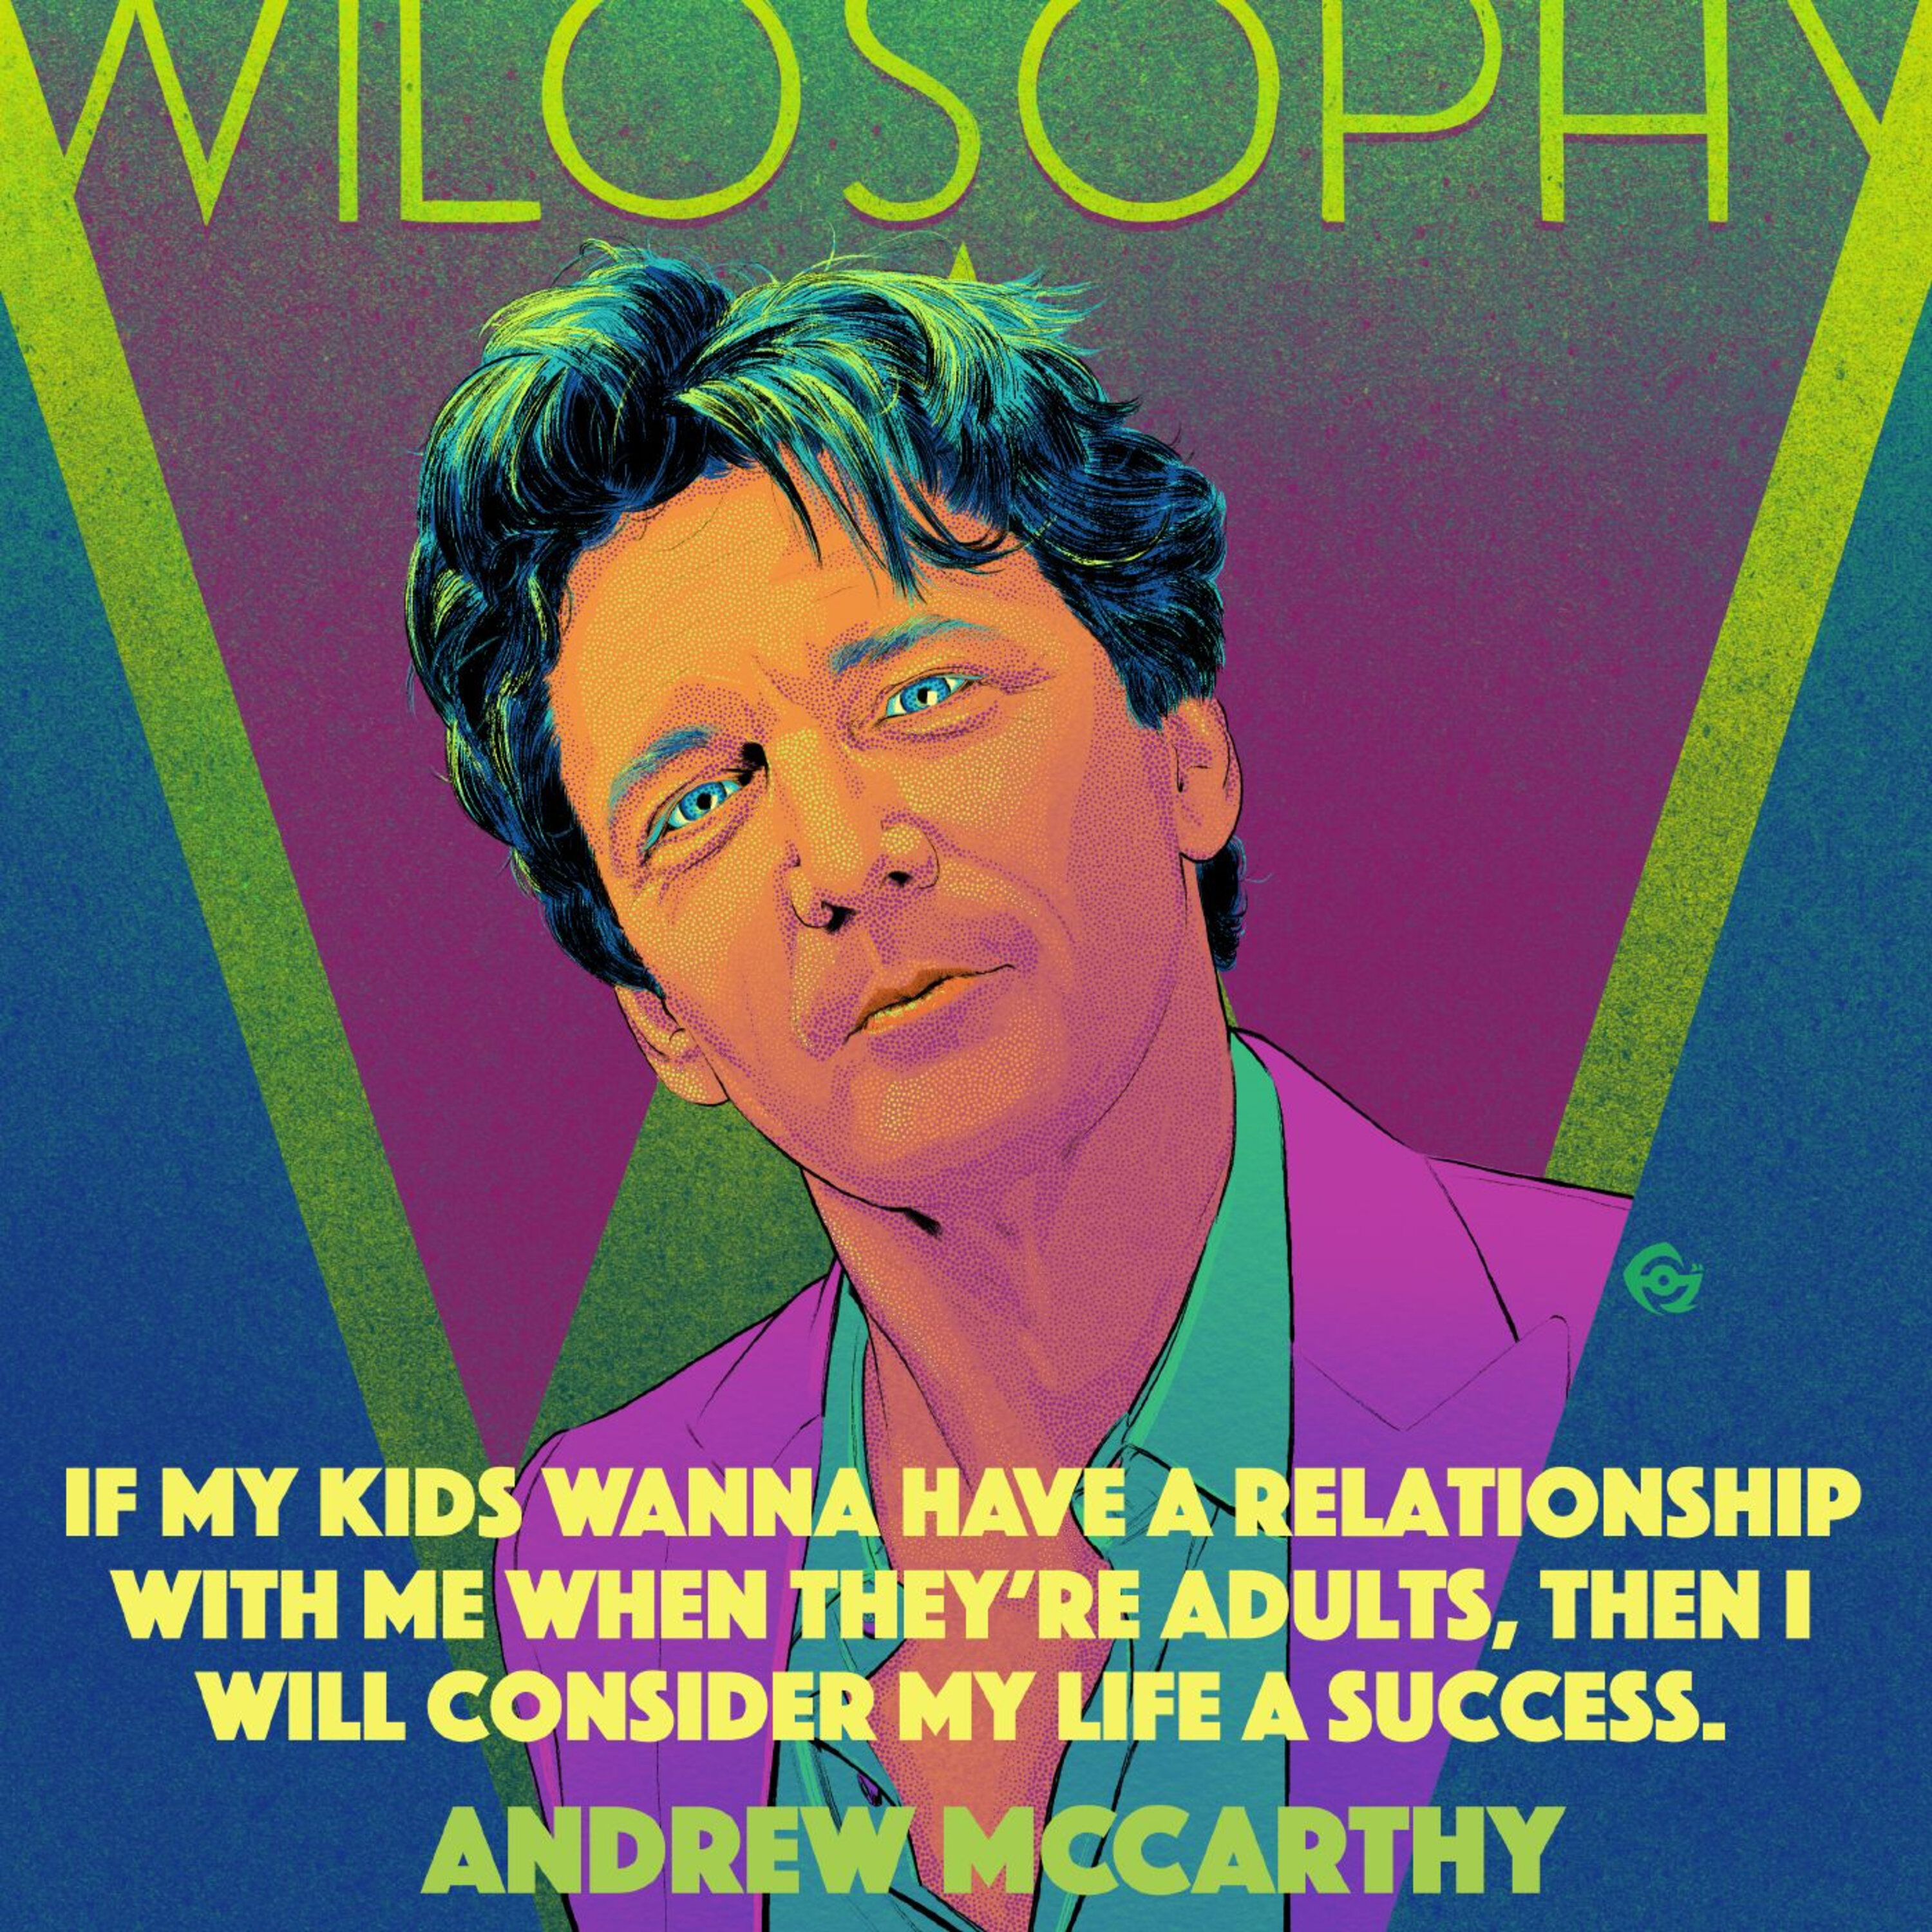 WILOSOPHY with Andrew McCarthy